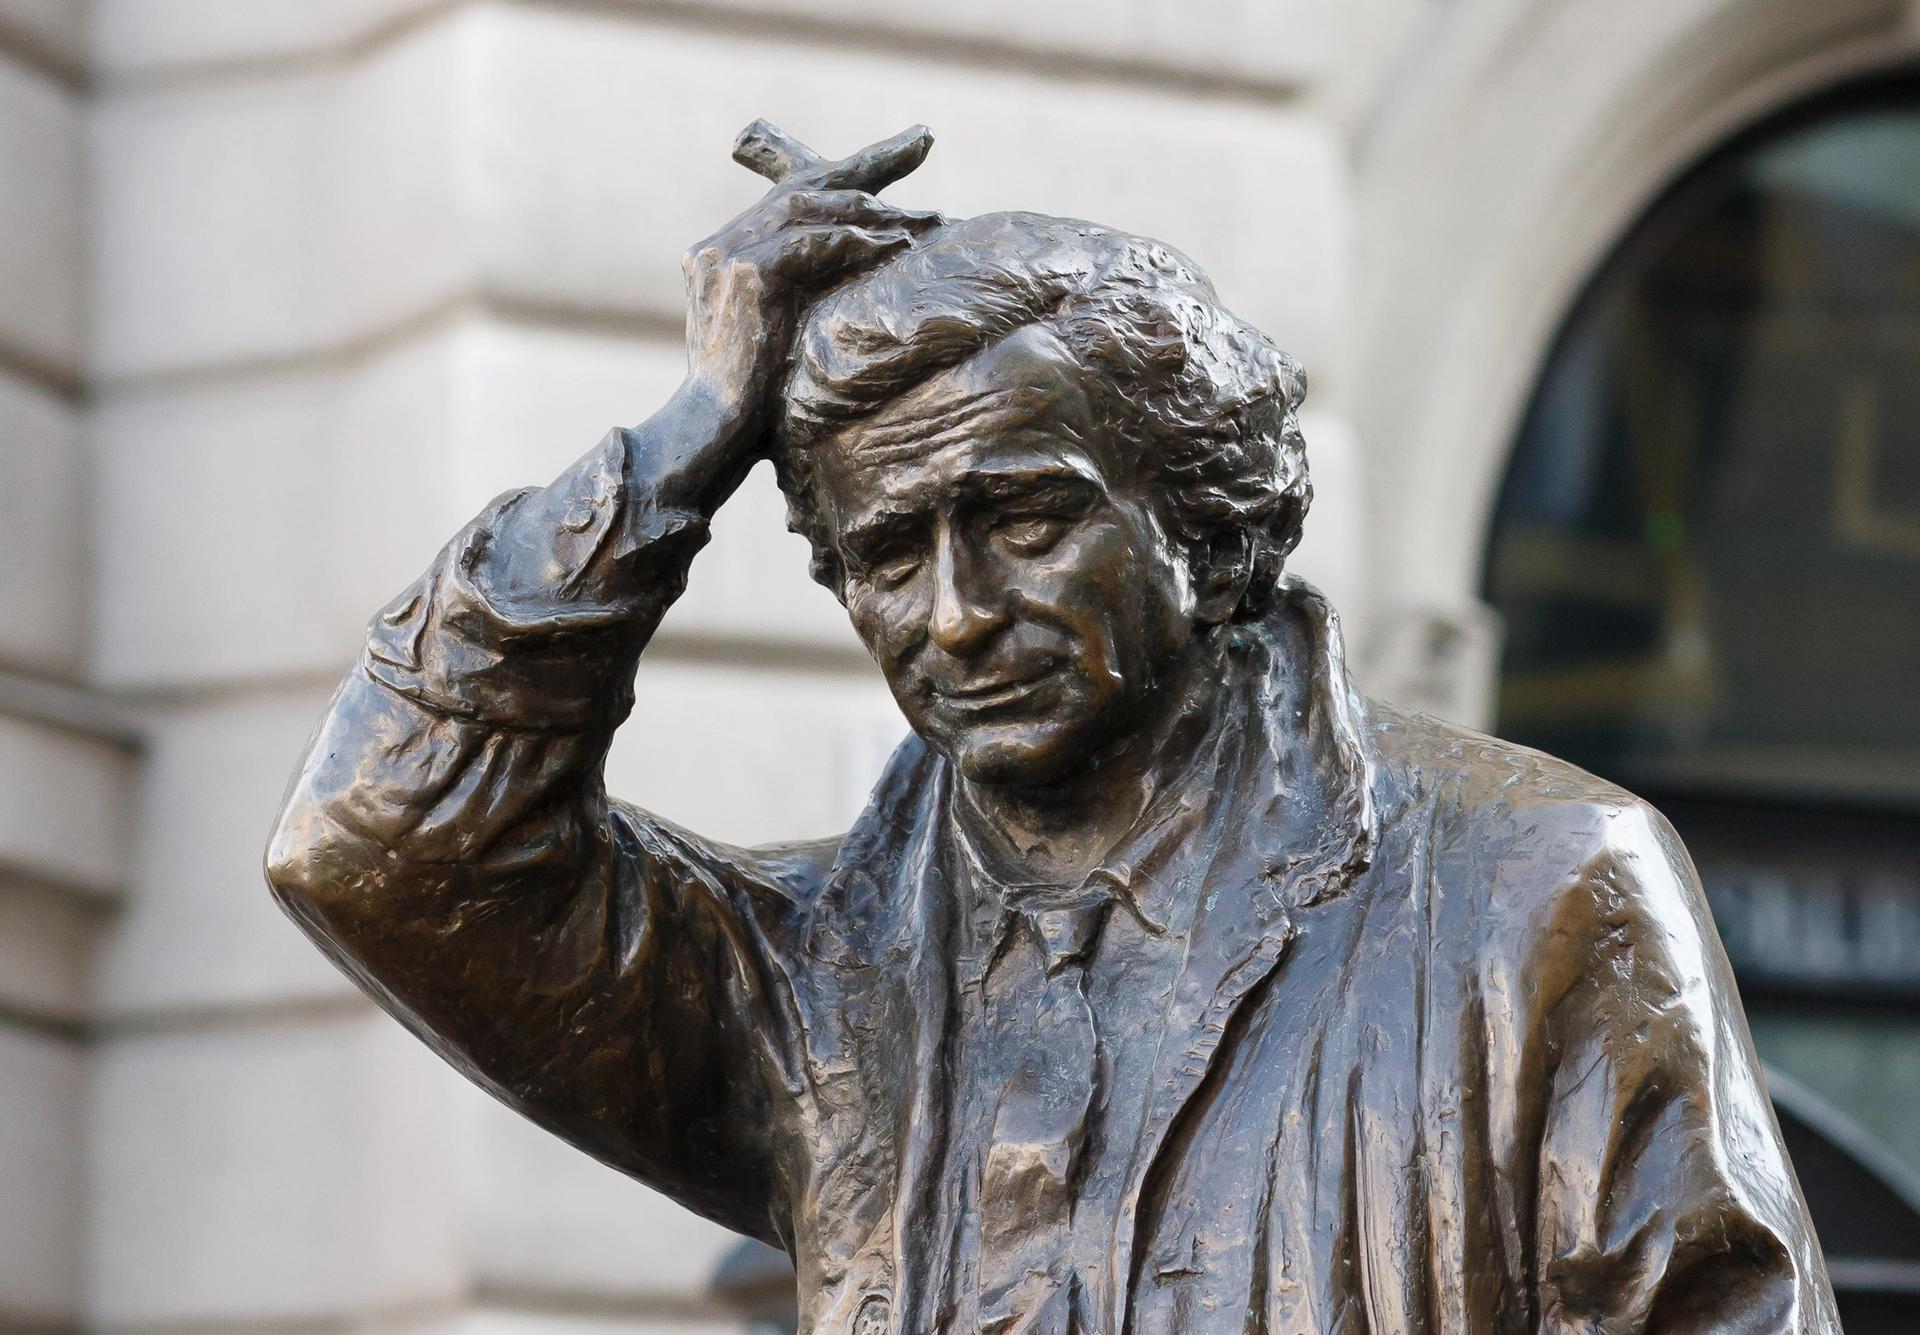 In 2014, the city of Budapest unveiled a life-size bronze statue of Columbo in celebration of the actor’s Hungarian roots Photo: Ken Owen via Flickr